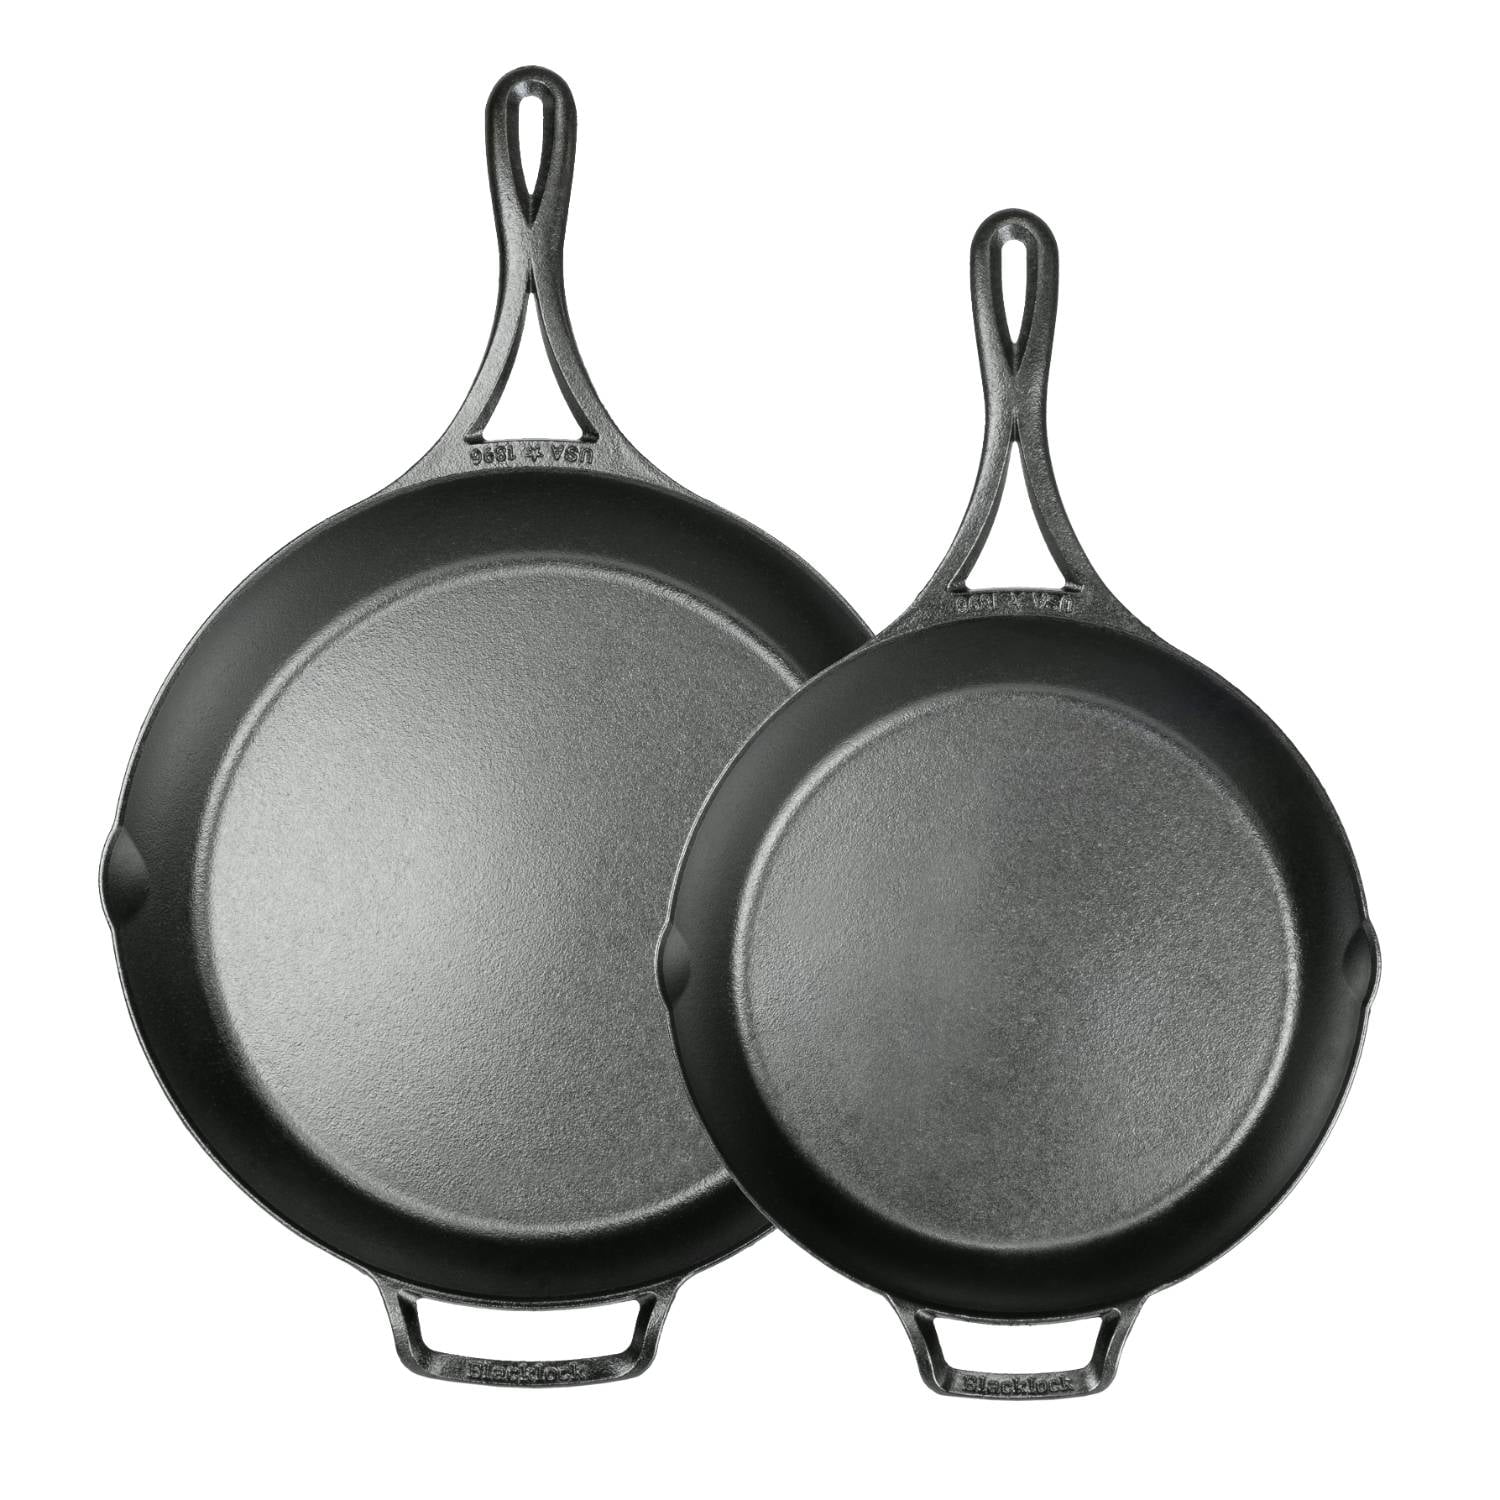 2 brand new “Old Mountain” 12 inch preseasoned cast iron skillets